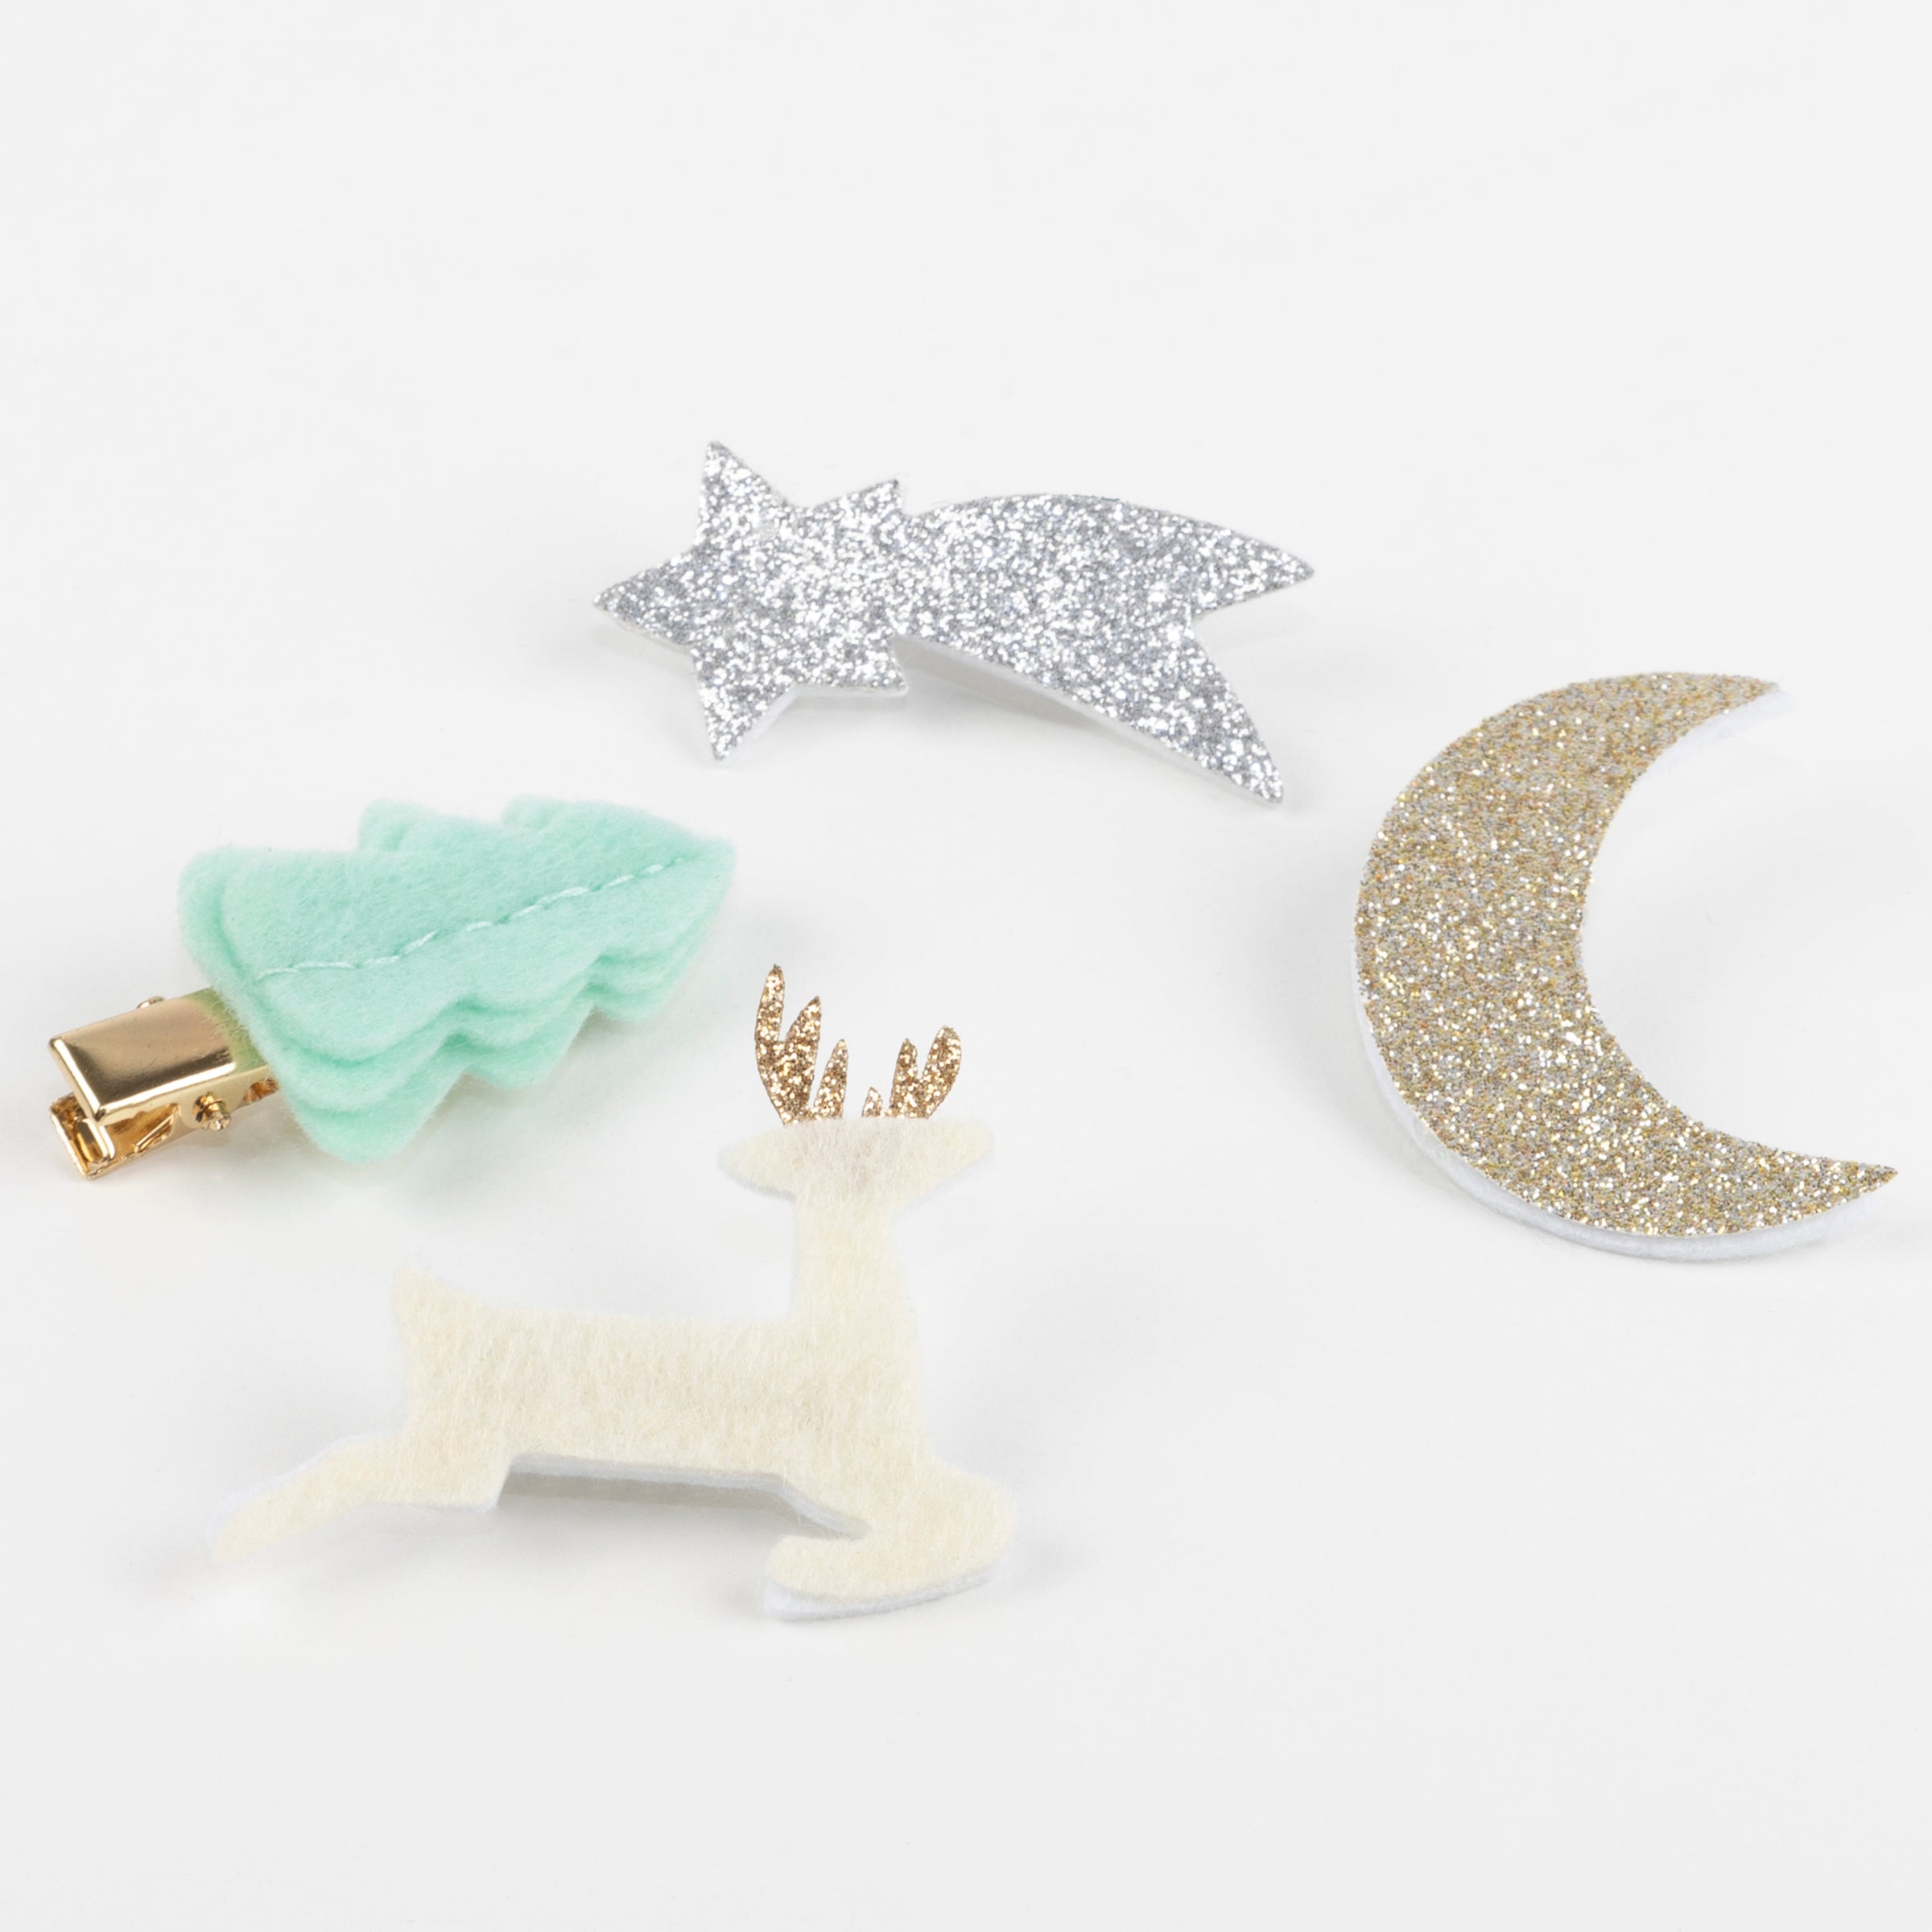 Our Christmas hair clips are crafted from felt and glitter.